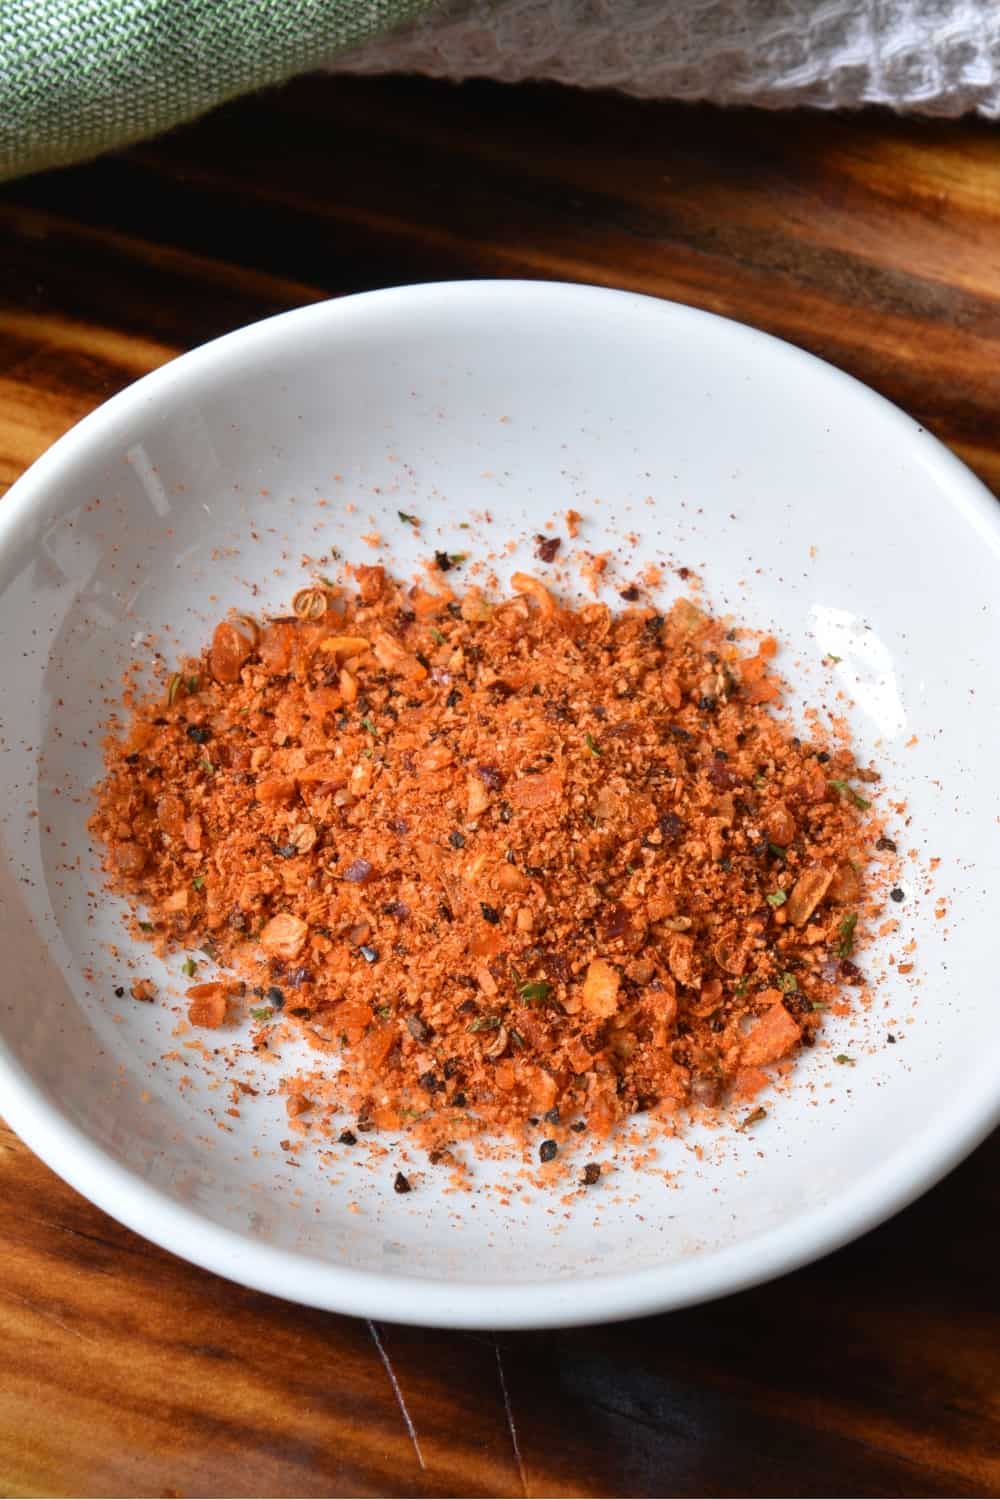 Small dish of Chipotle spice mix with garlic